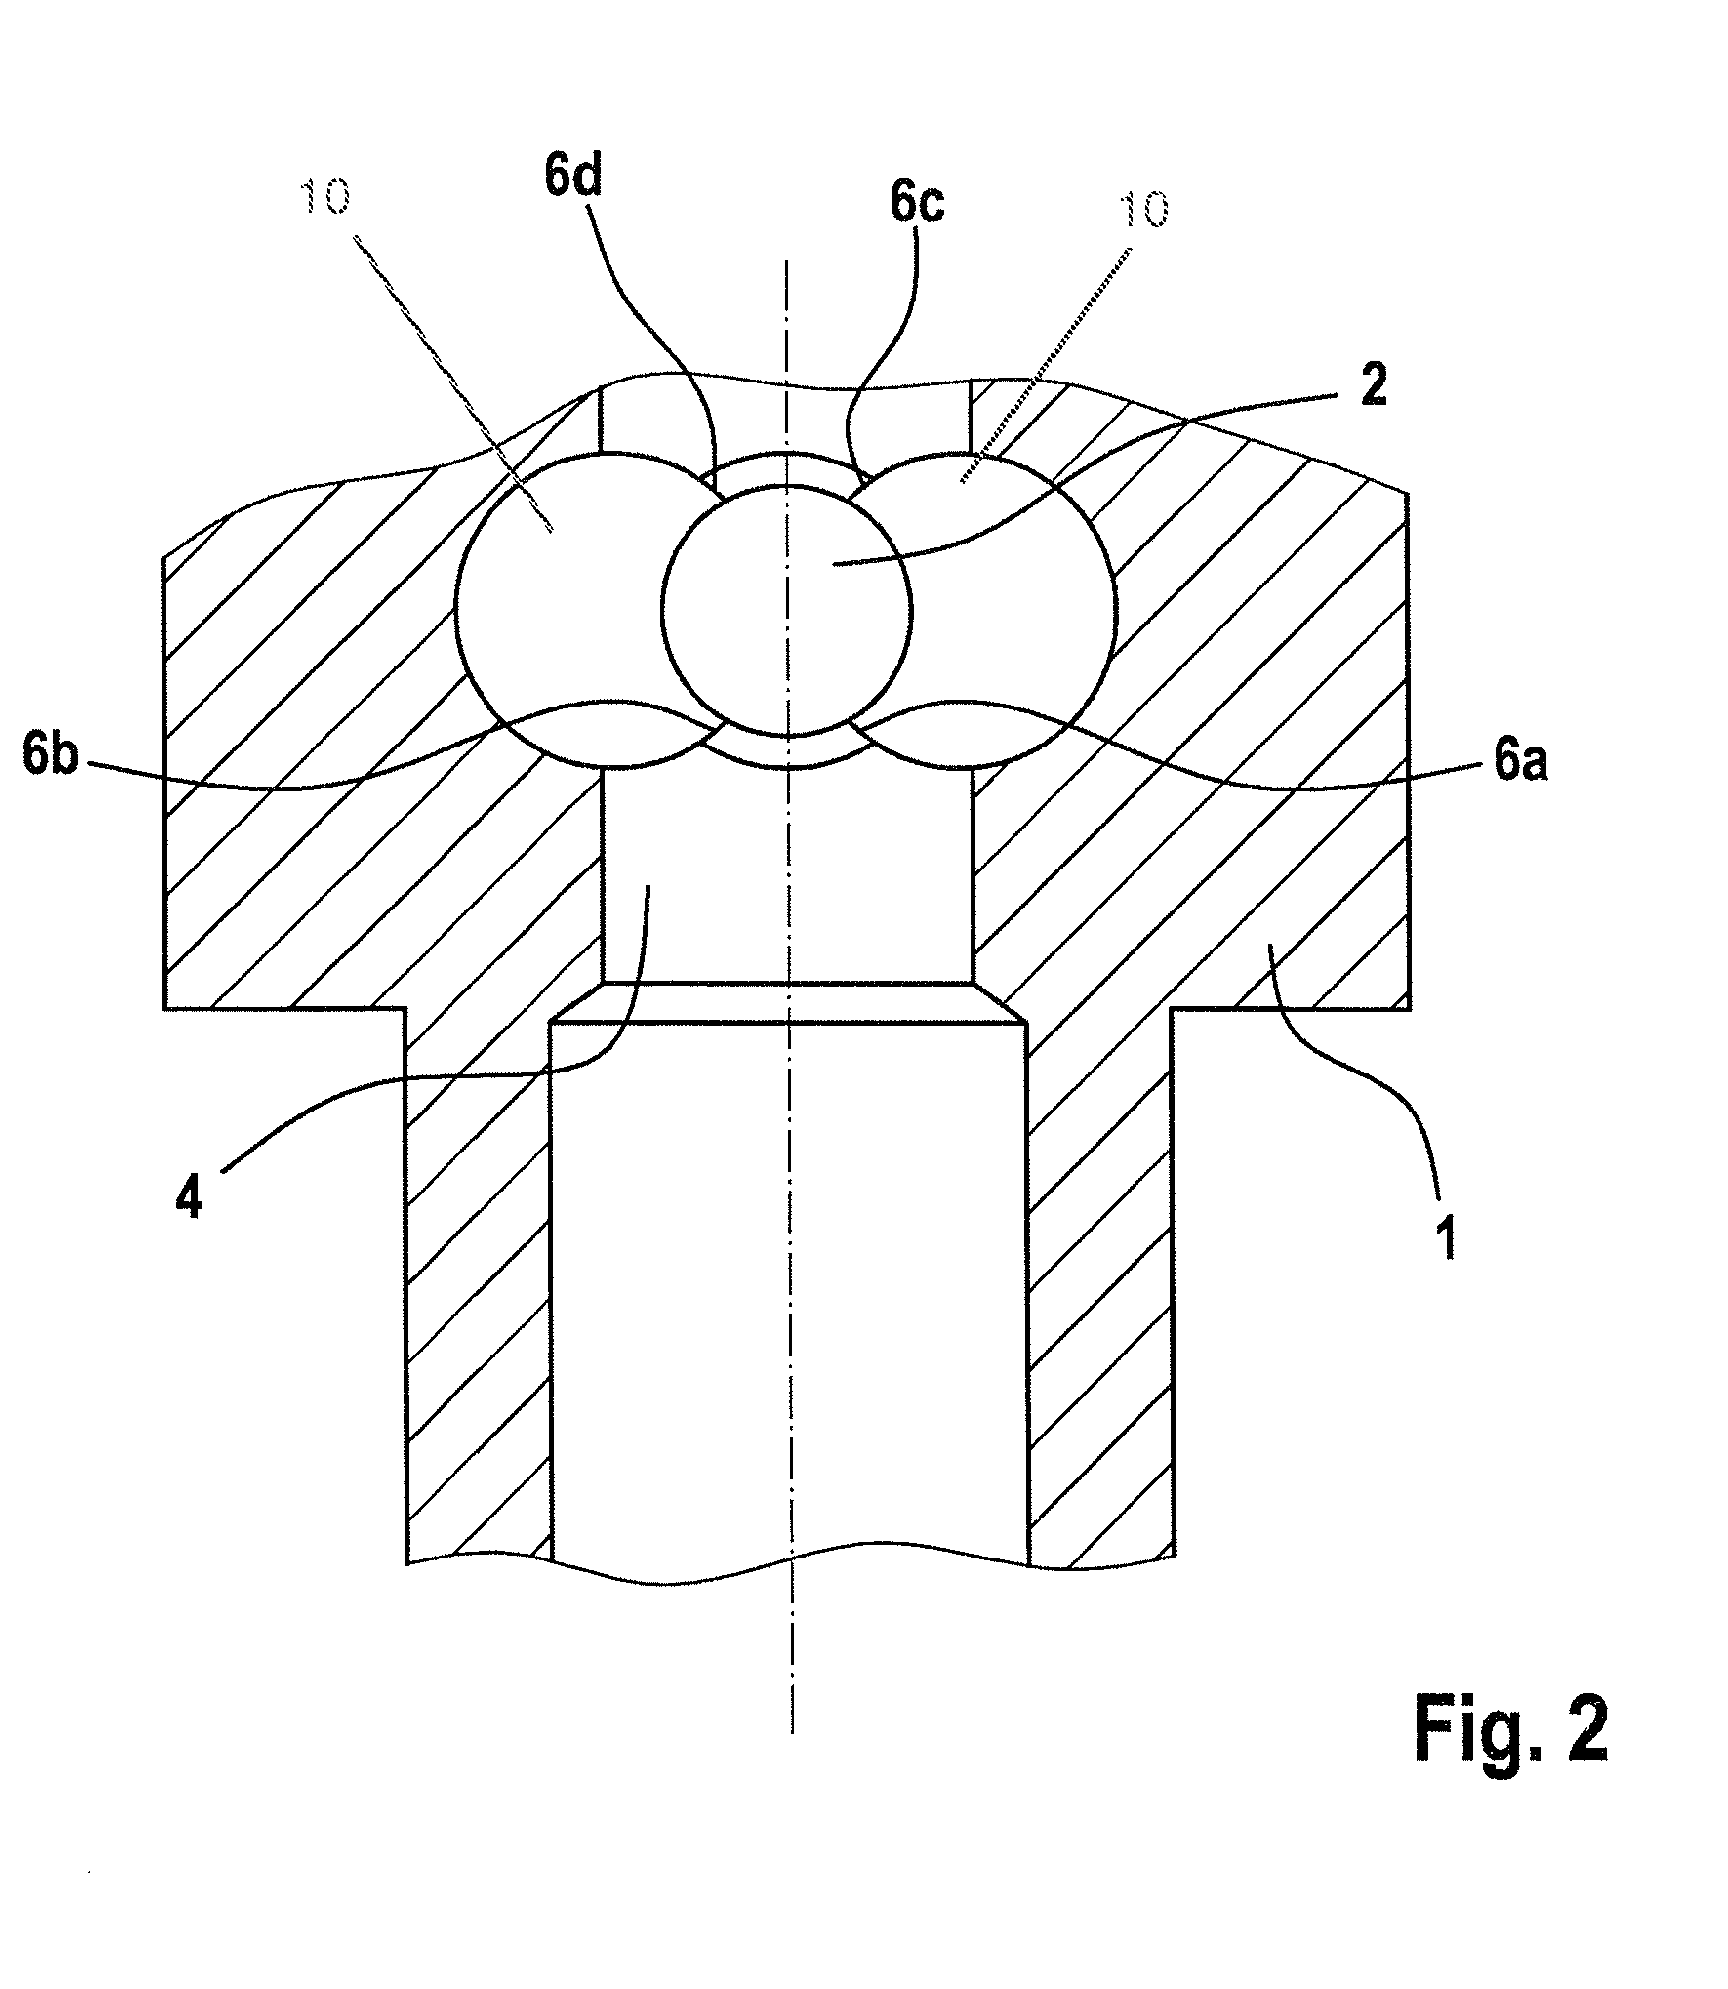 Fuel injector having a high-pressure inlet